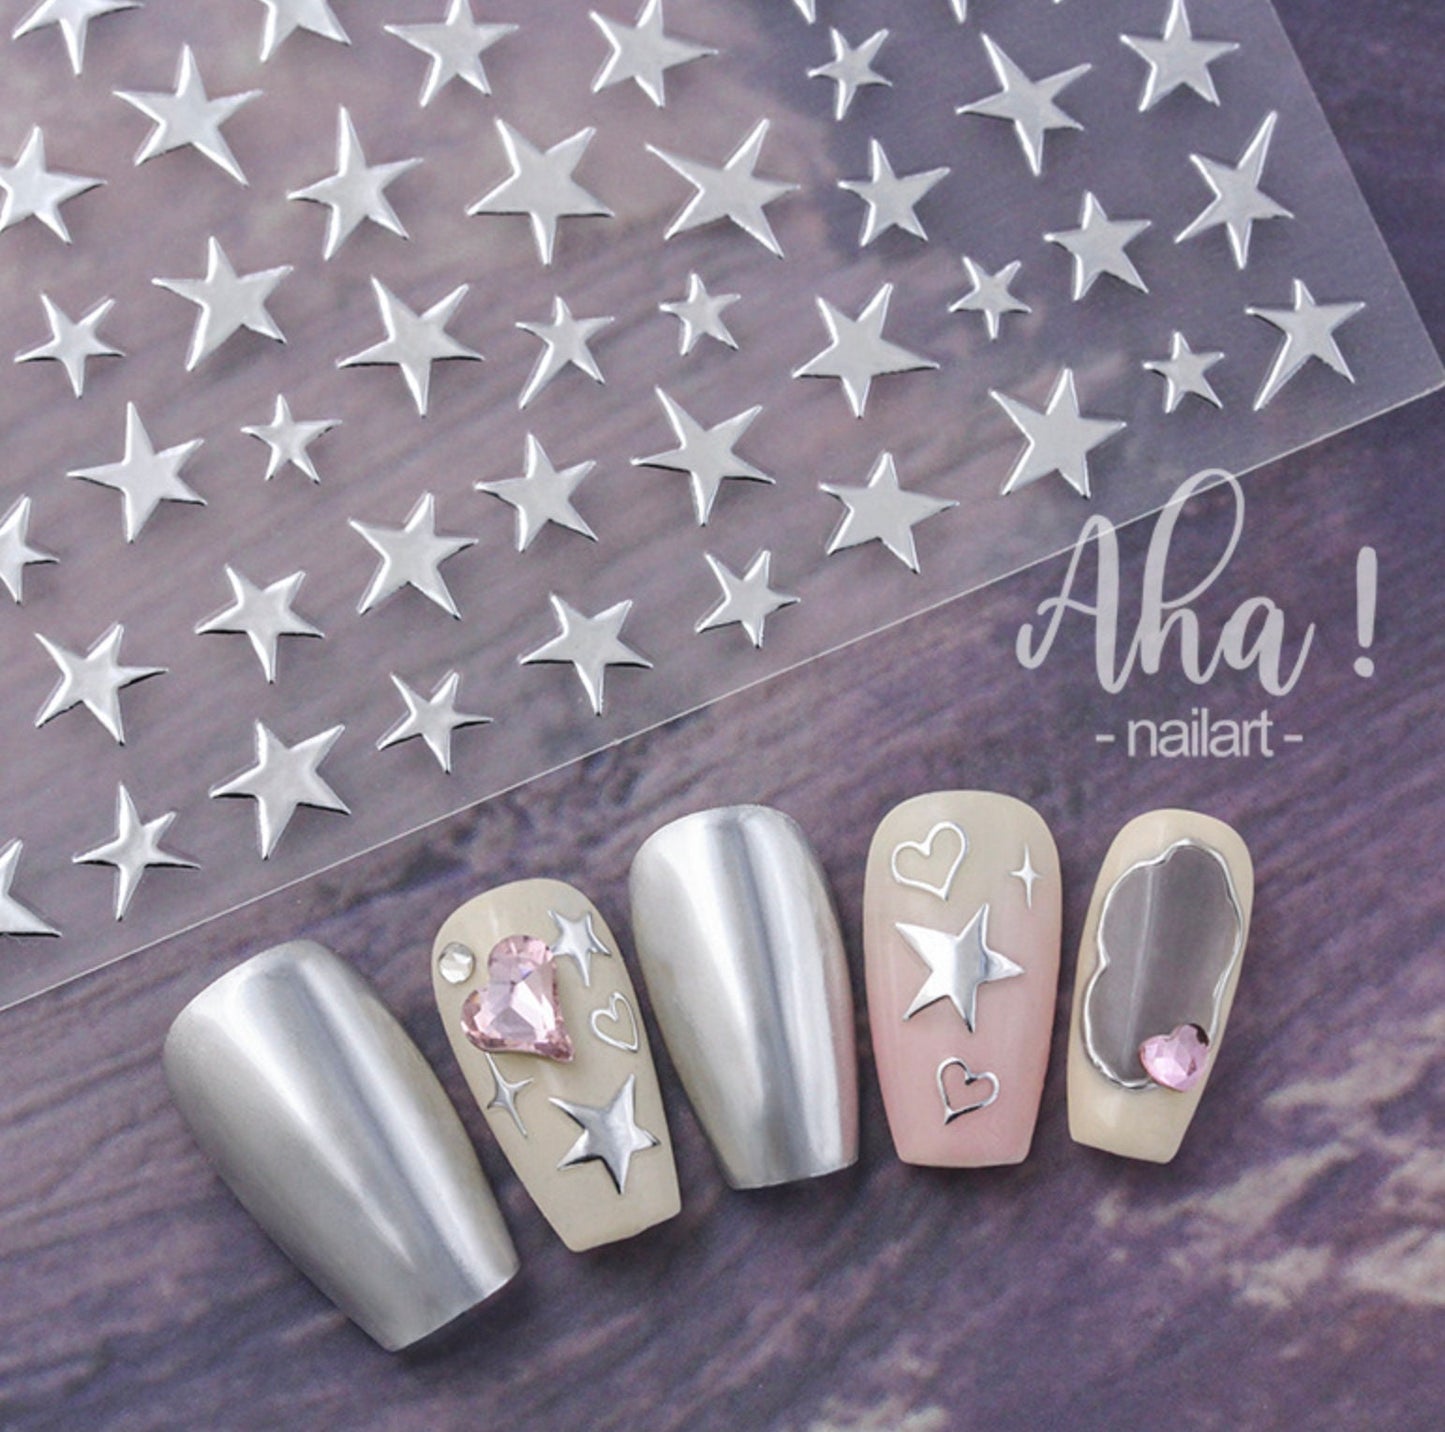 Multi Sized Star Themed Nail Art Stickers